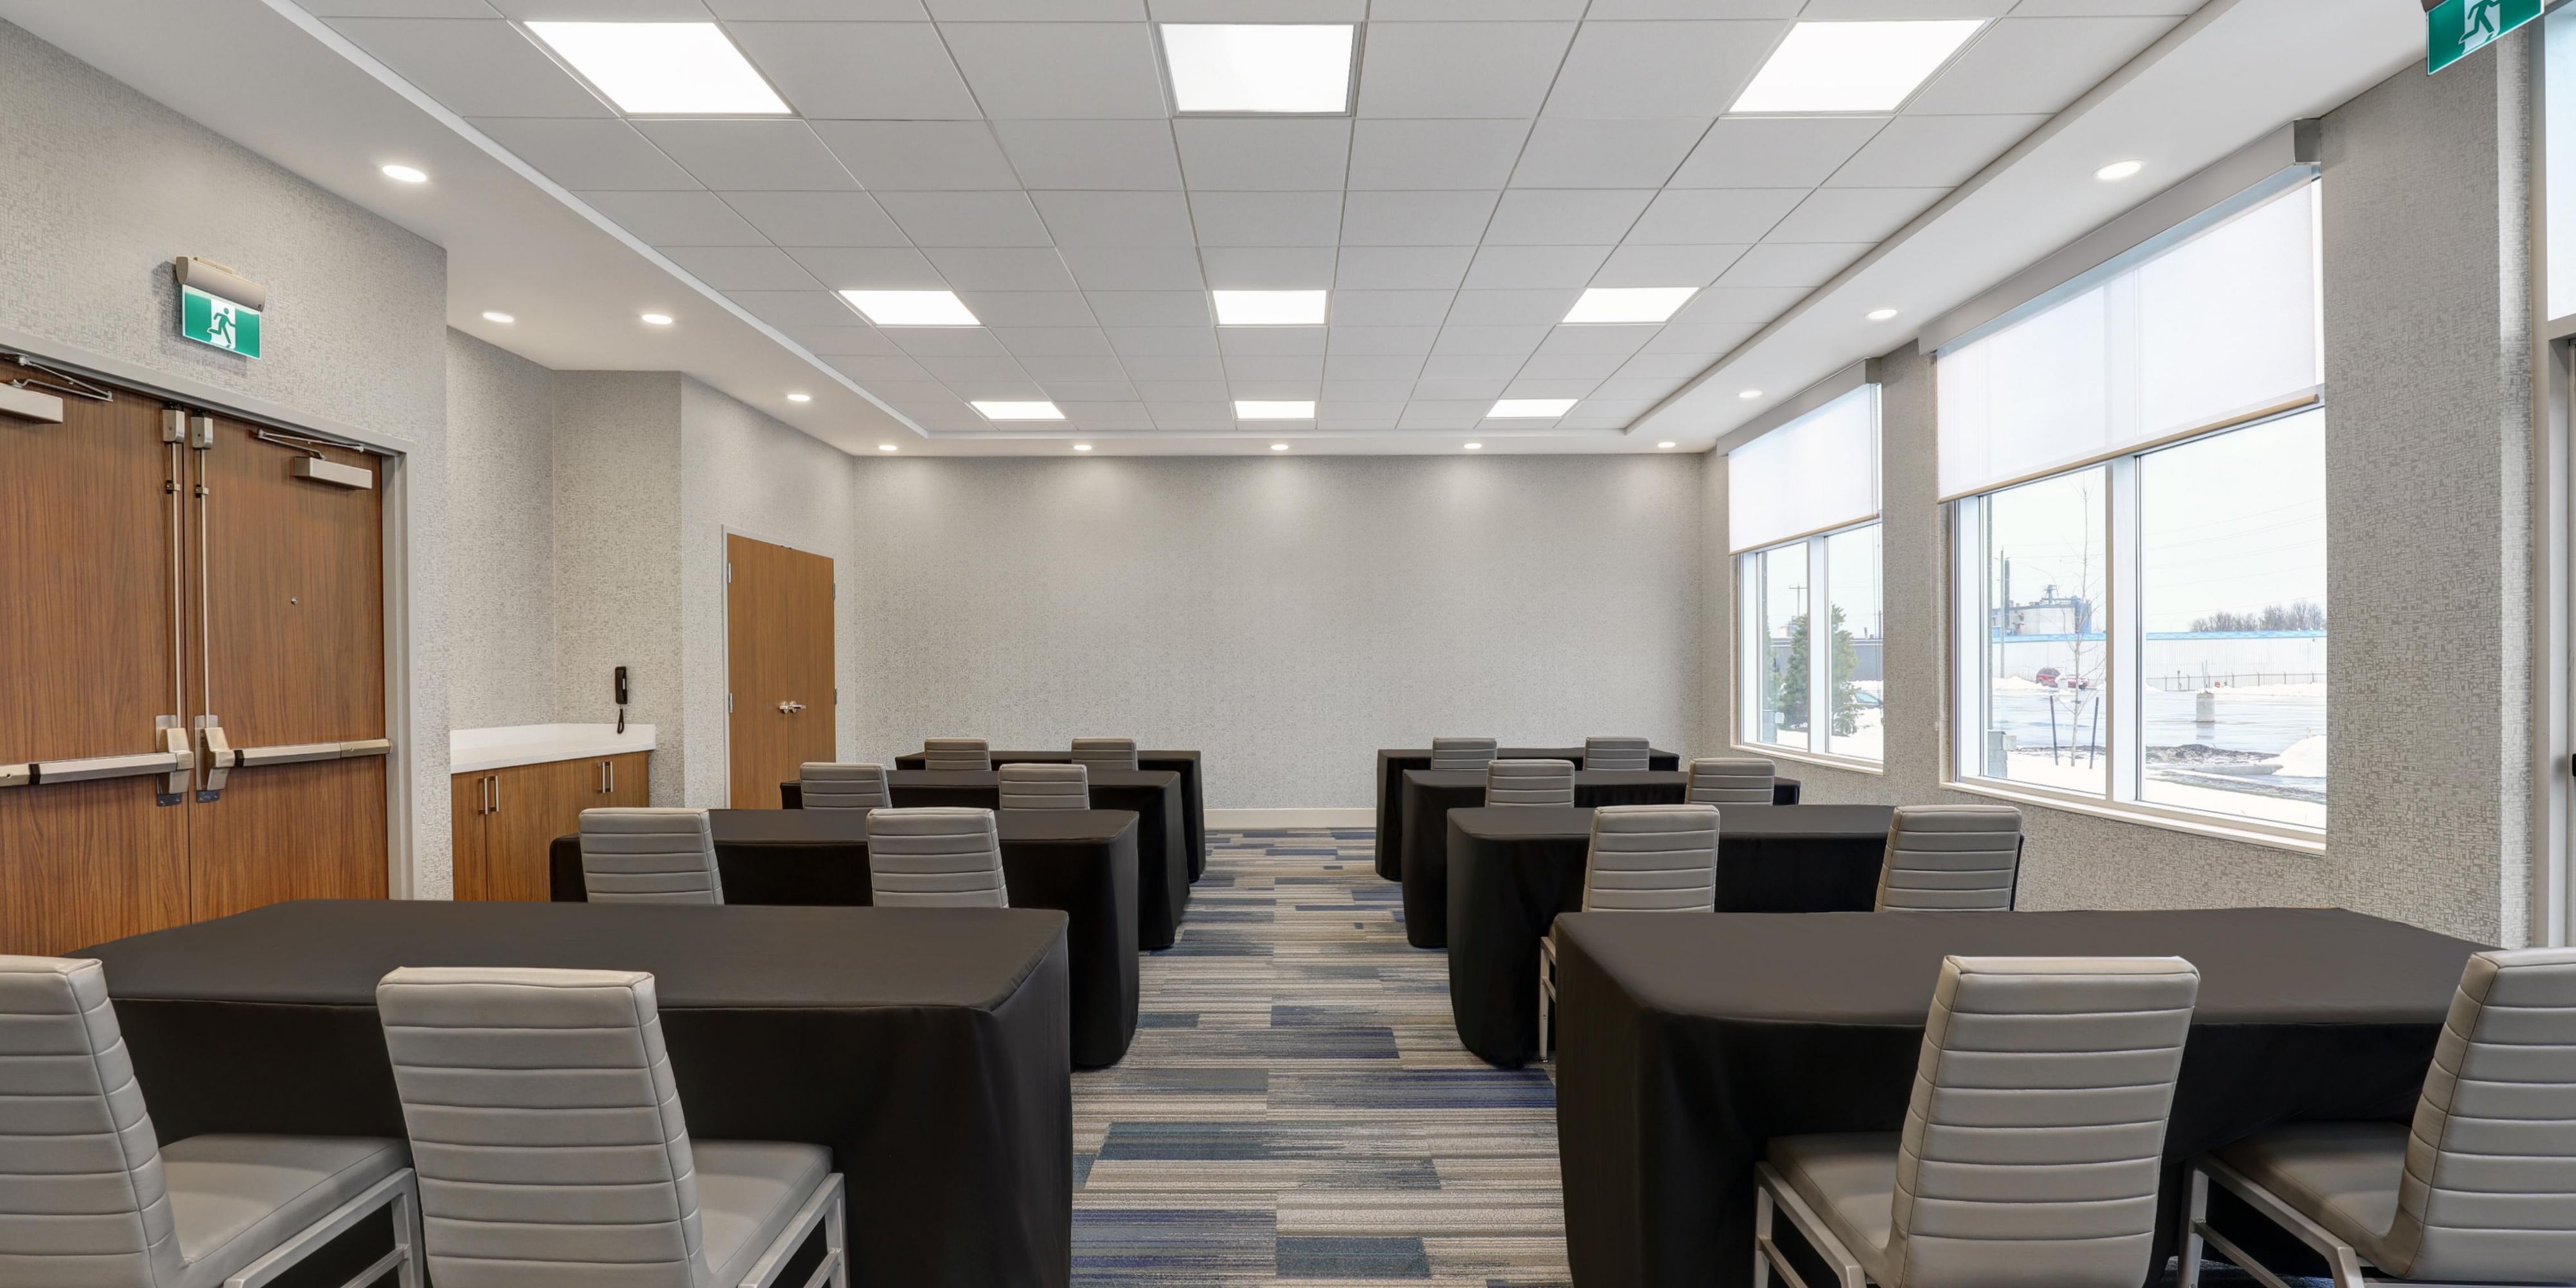 Looking to host a Meeting or Event? Our flexible meeting space is full of natural light and can accommodate up to 60 people. Call or email us for more details.
